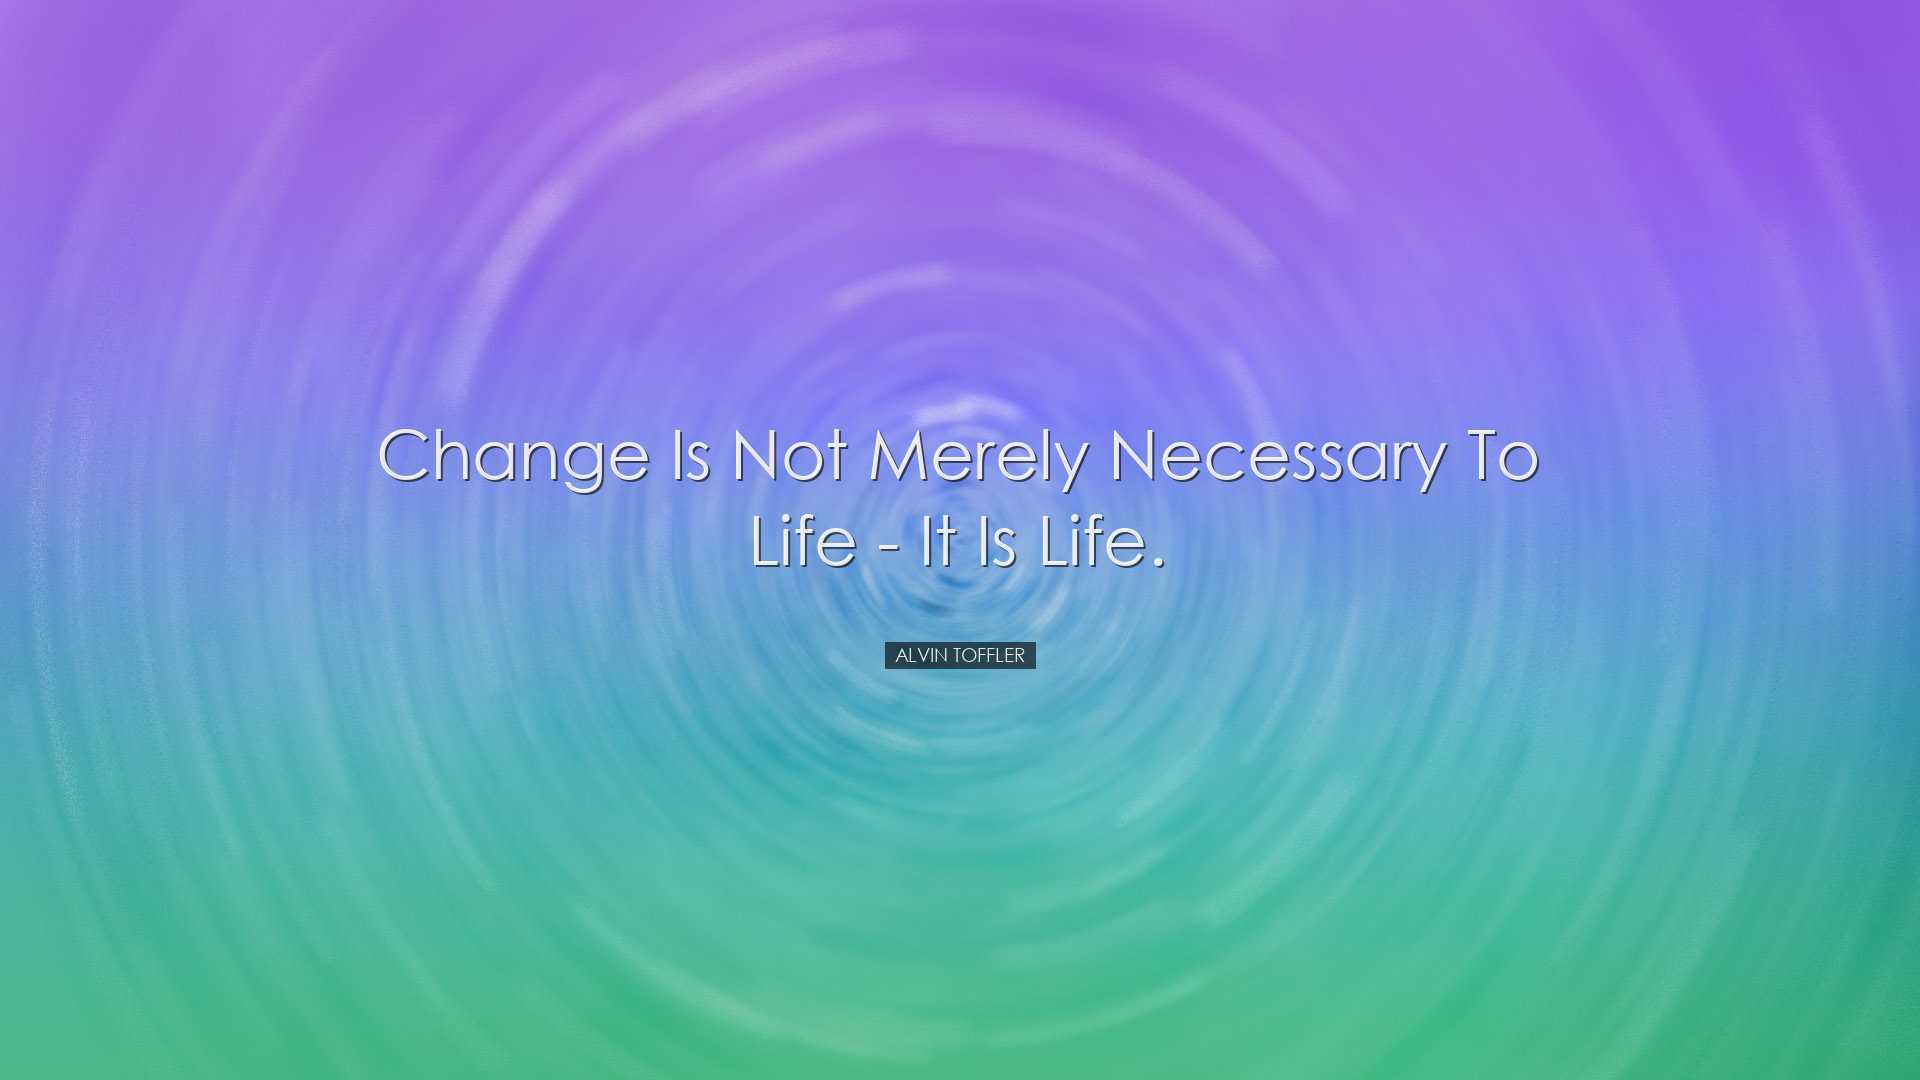 Change is not merely necessary to life - it is life. - Alvin Toffl